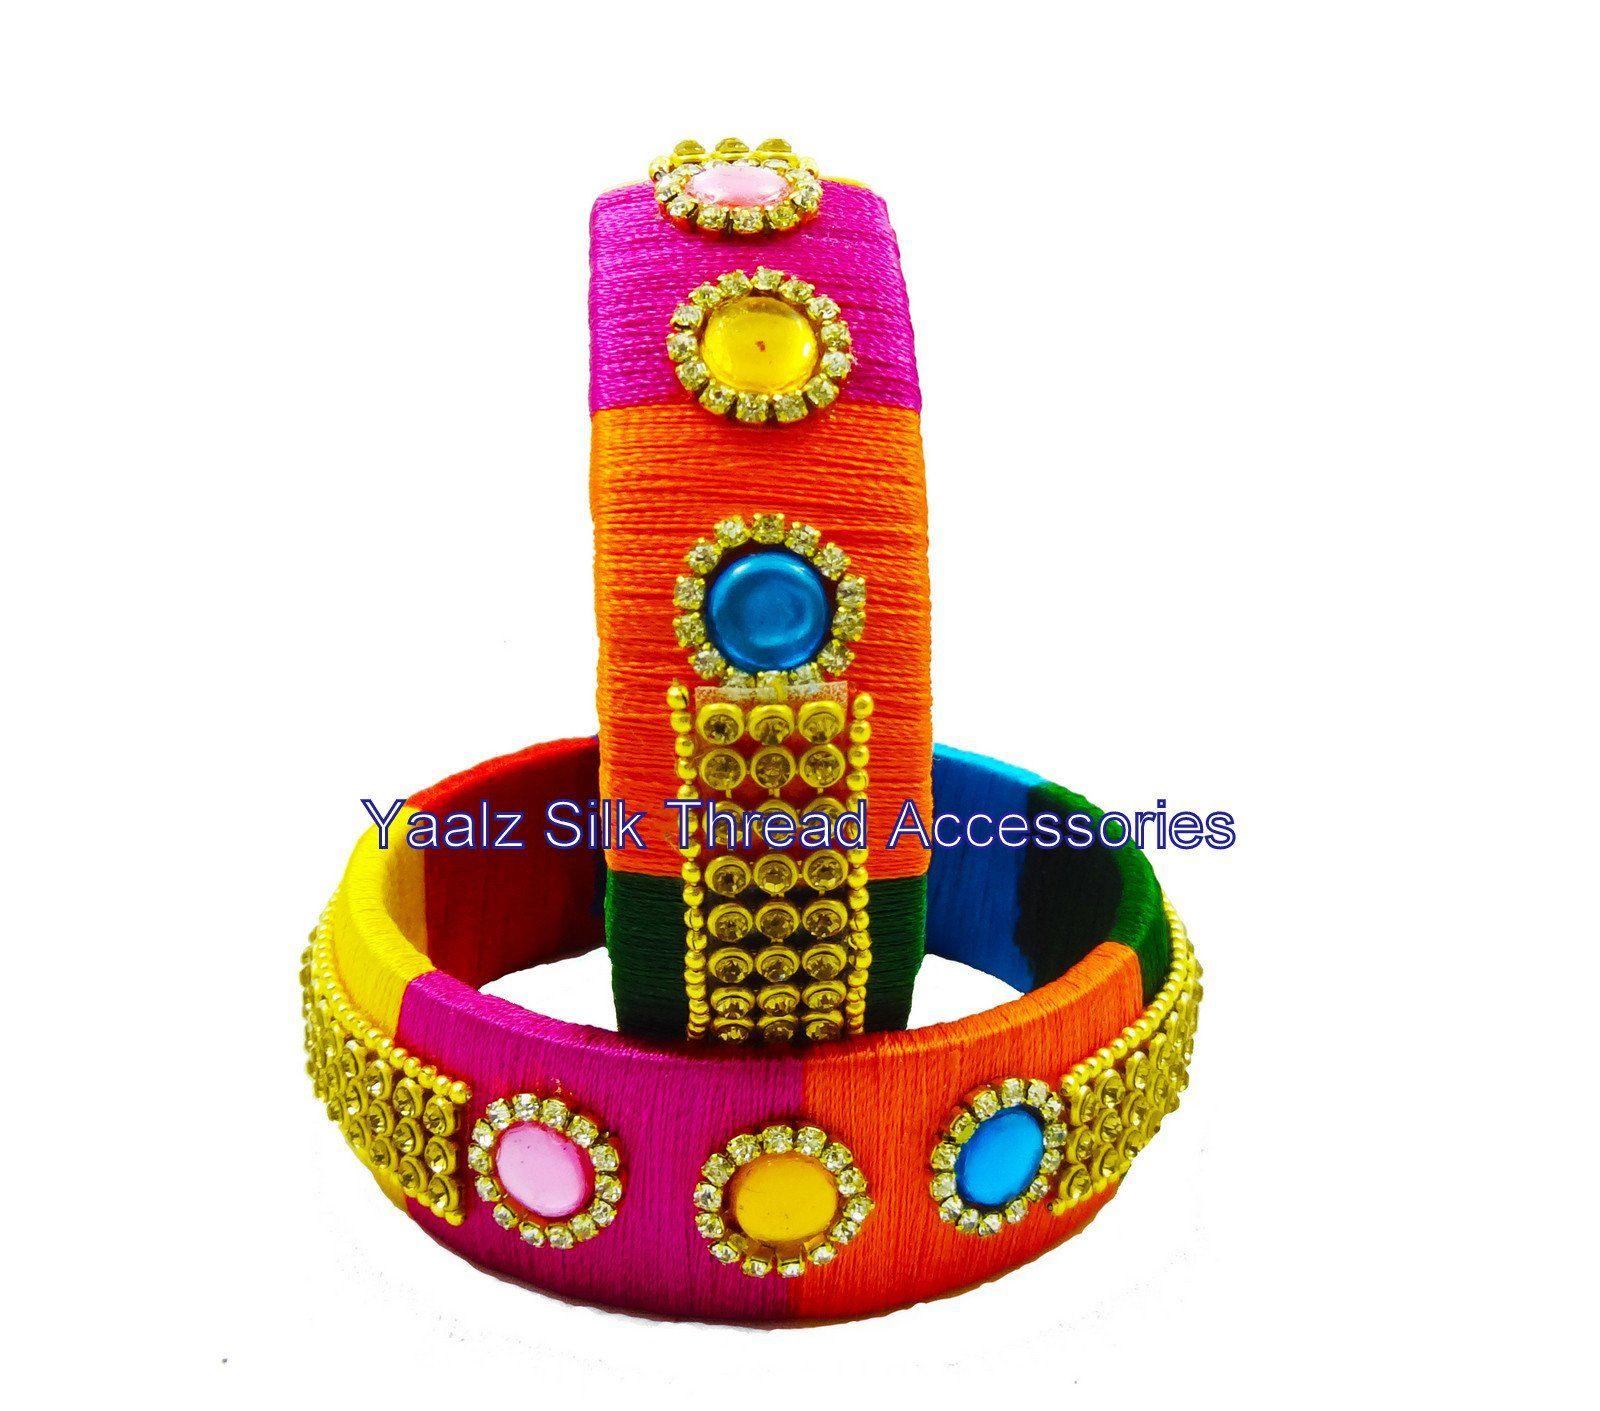 Light Blue Dark Blue Red Orange in a Circle Logo - Yaalz Assorted Threaded Bangle Collection in Yellow, Red, Dark Blue ...